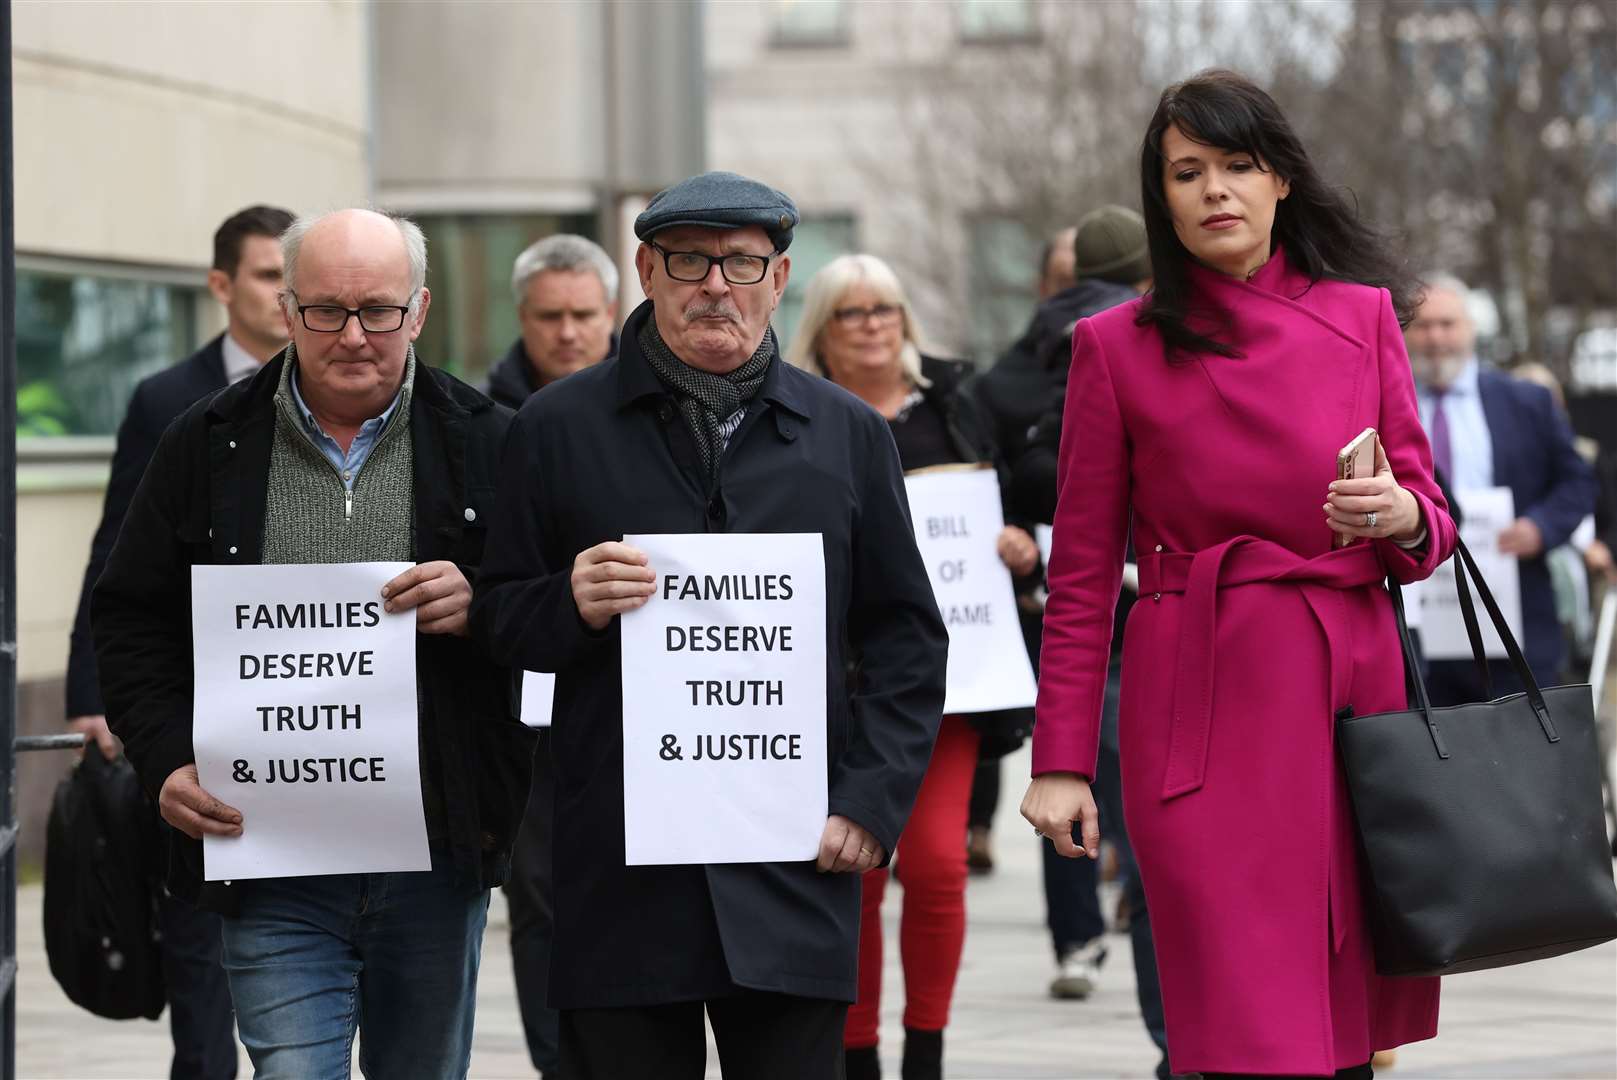 Sean McAnespie (centre), the brother of Aidan McAnespie, and Grainne Teggart (right) from Amnesty International outside Belfast Crown Court (Liam McBurney/PA)